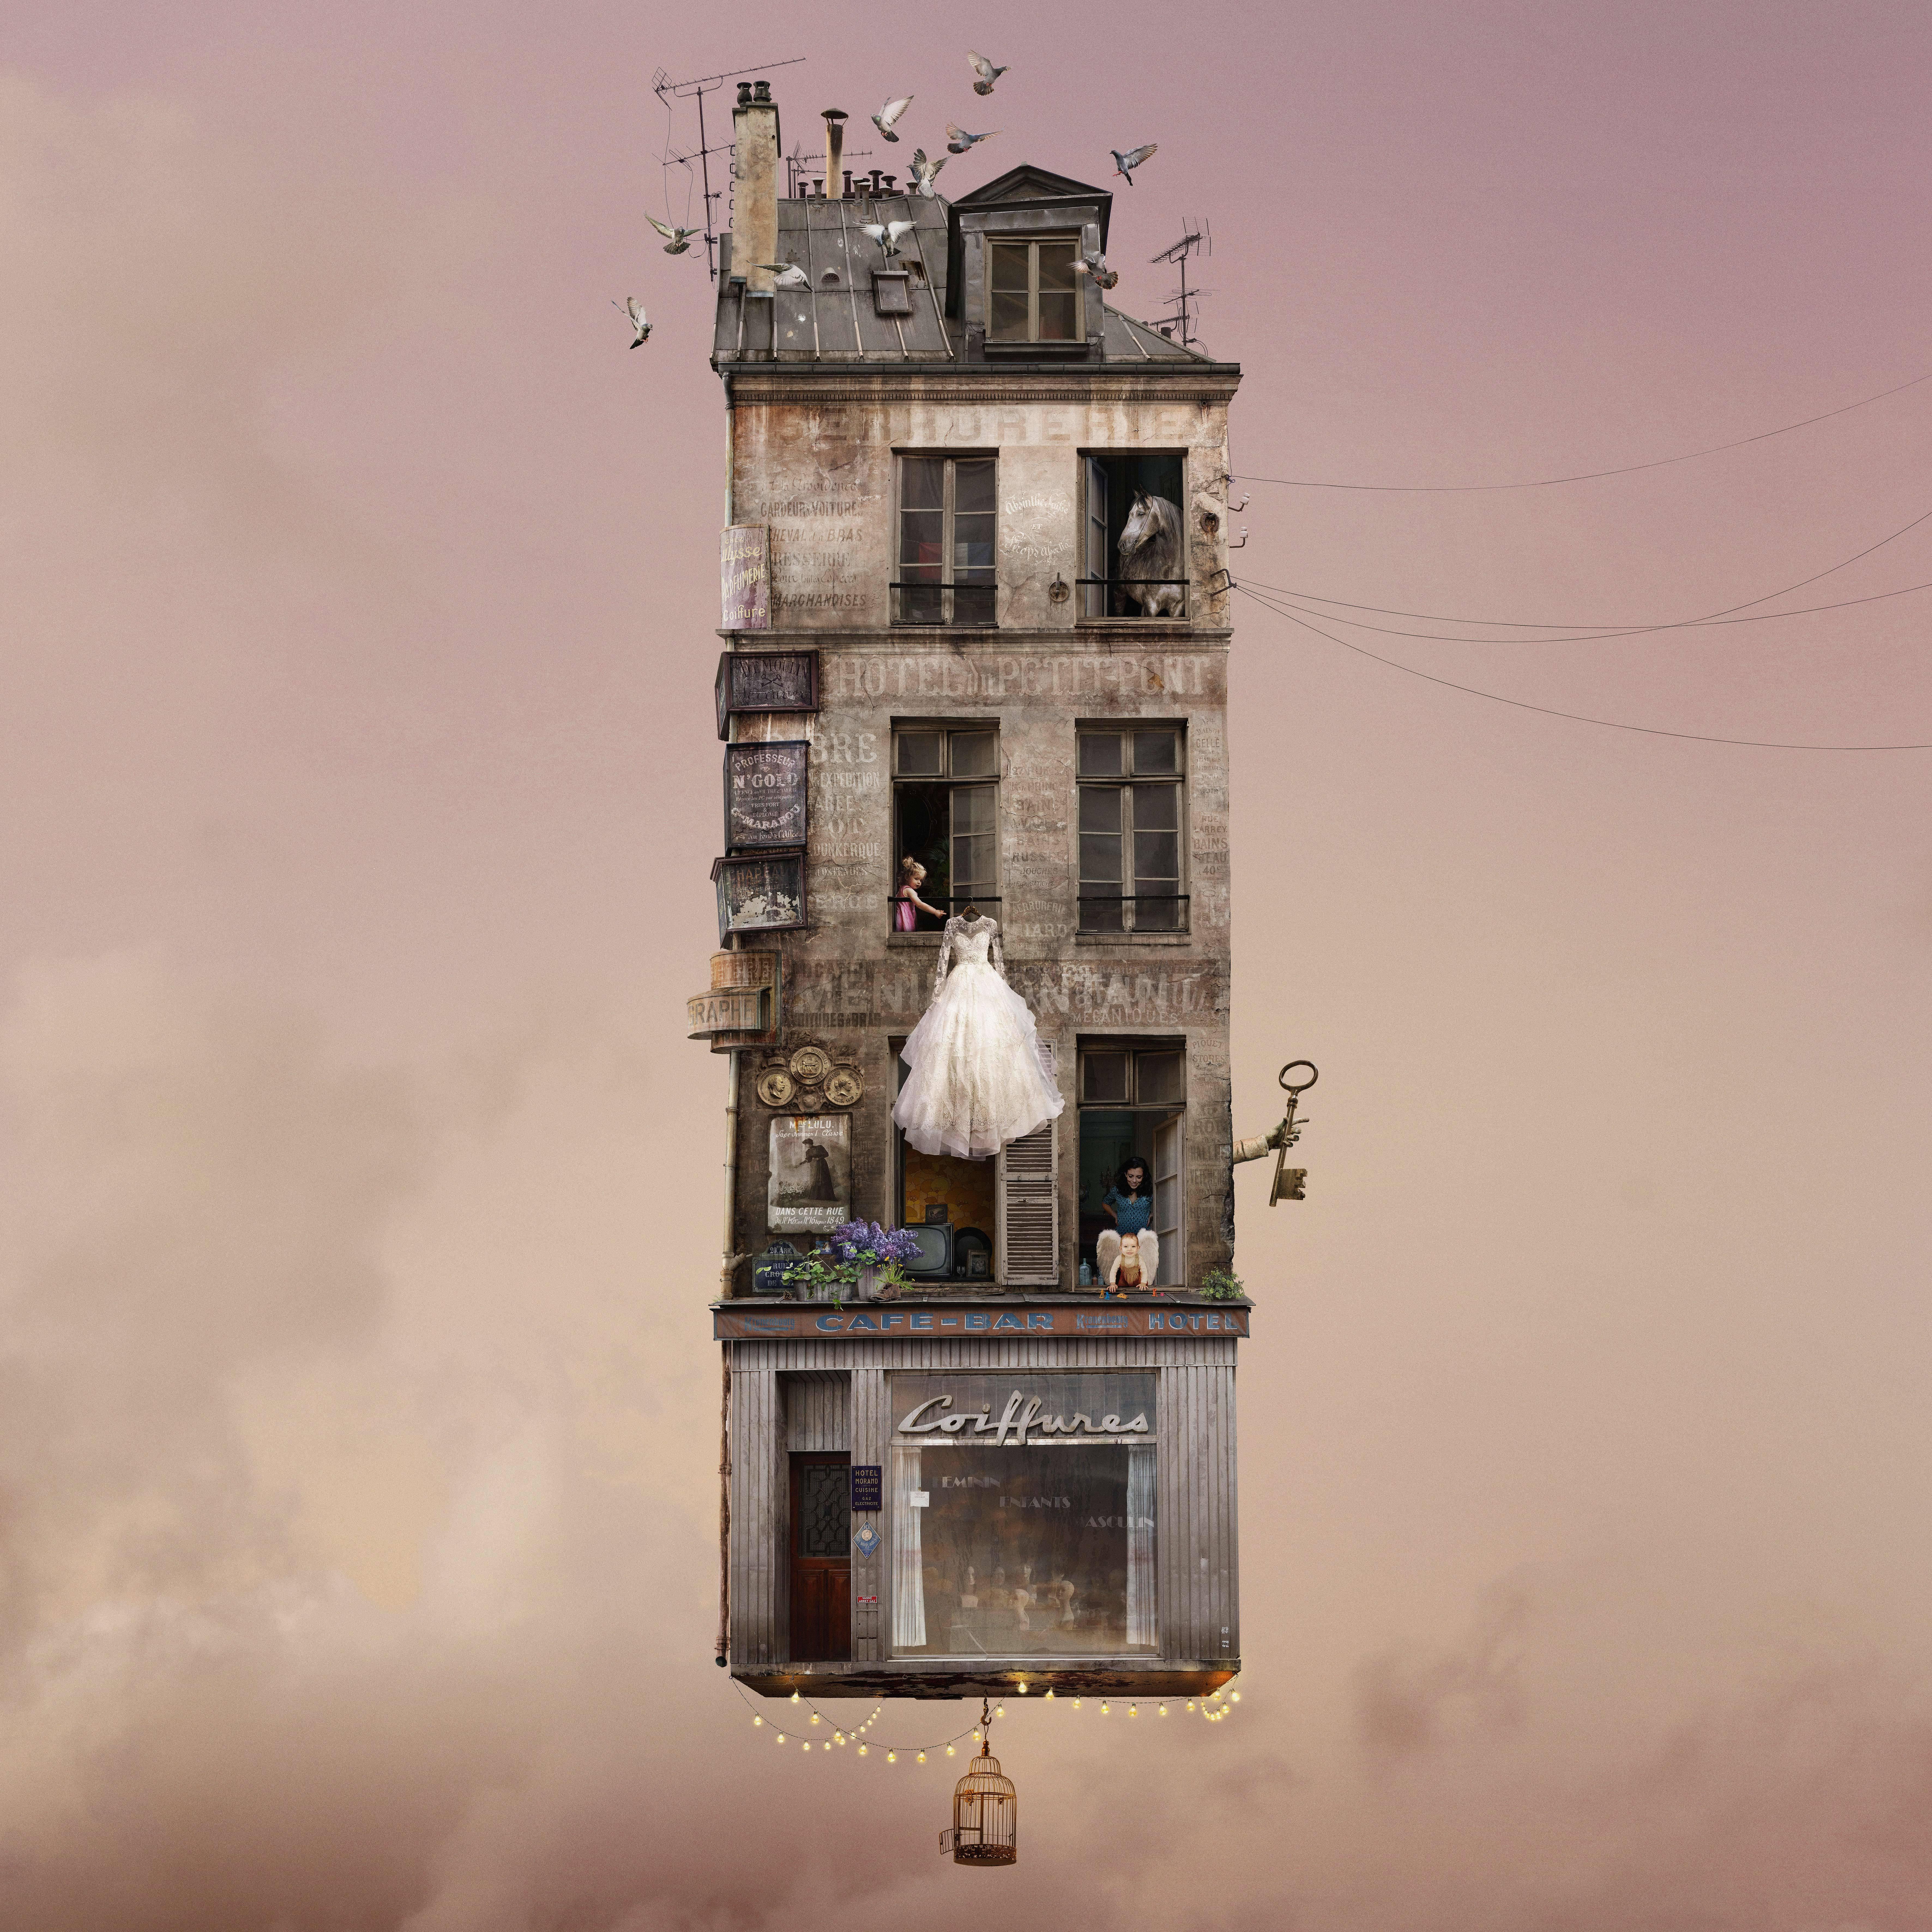 Big Day- Contemporary whimsical digital color photo of a Parisian flying house